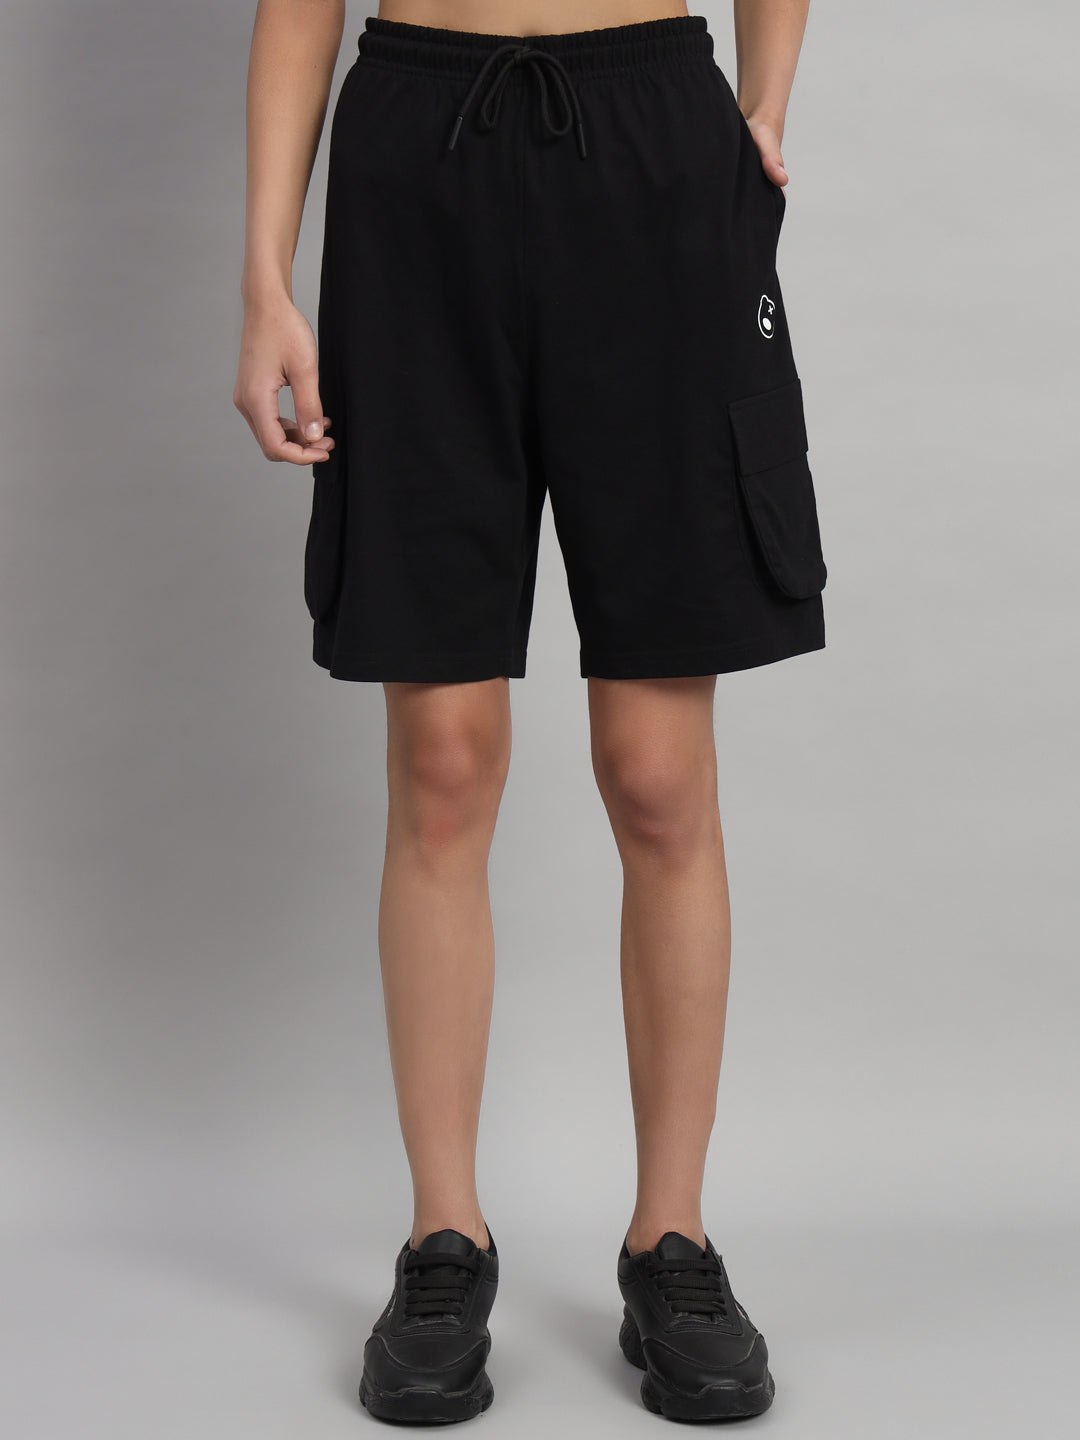 Utility T-shirt and Short Set - griffel